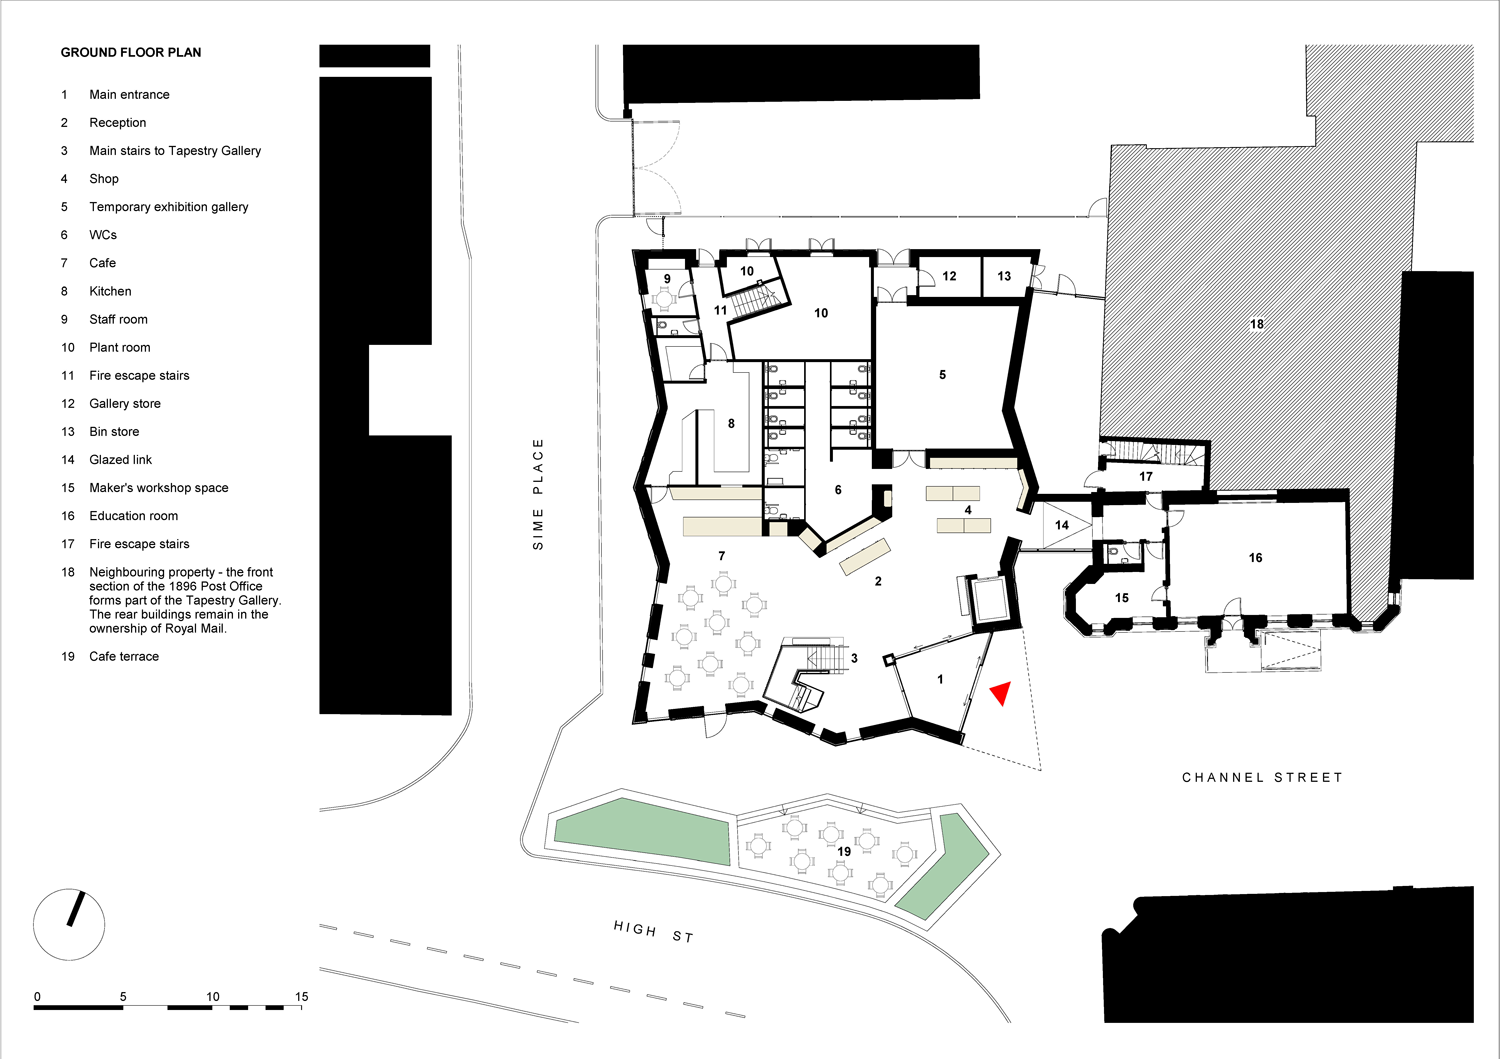 Glasgow-Institute-of-Architects-awards-2021-leisure-arts-Ground-Floor-Plan.png